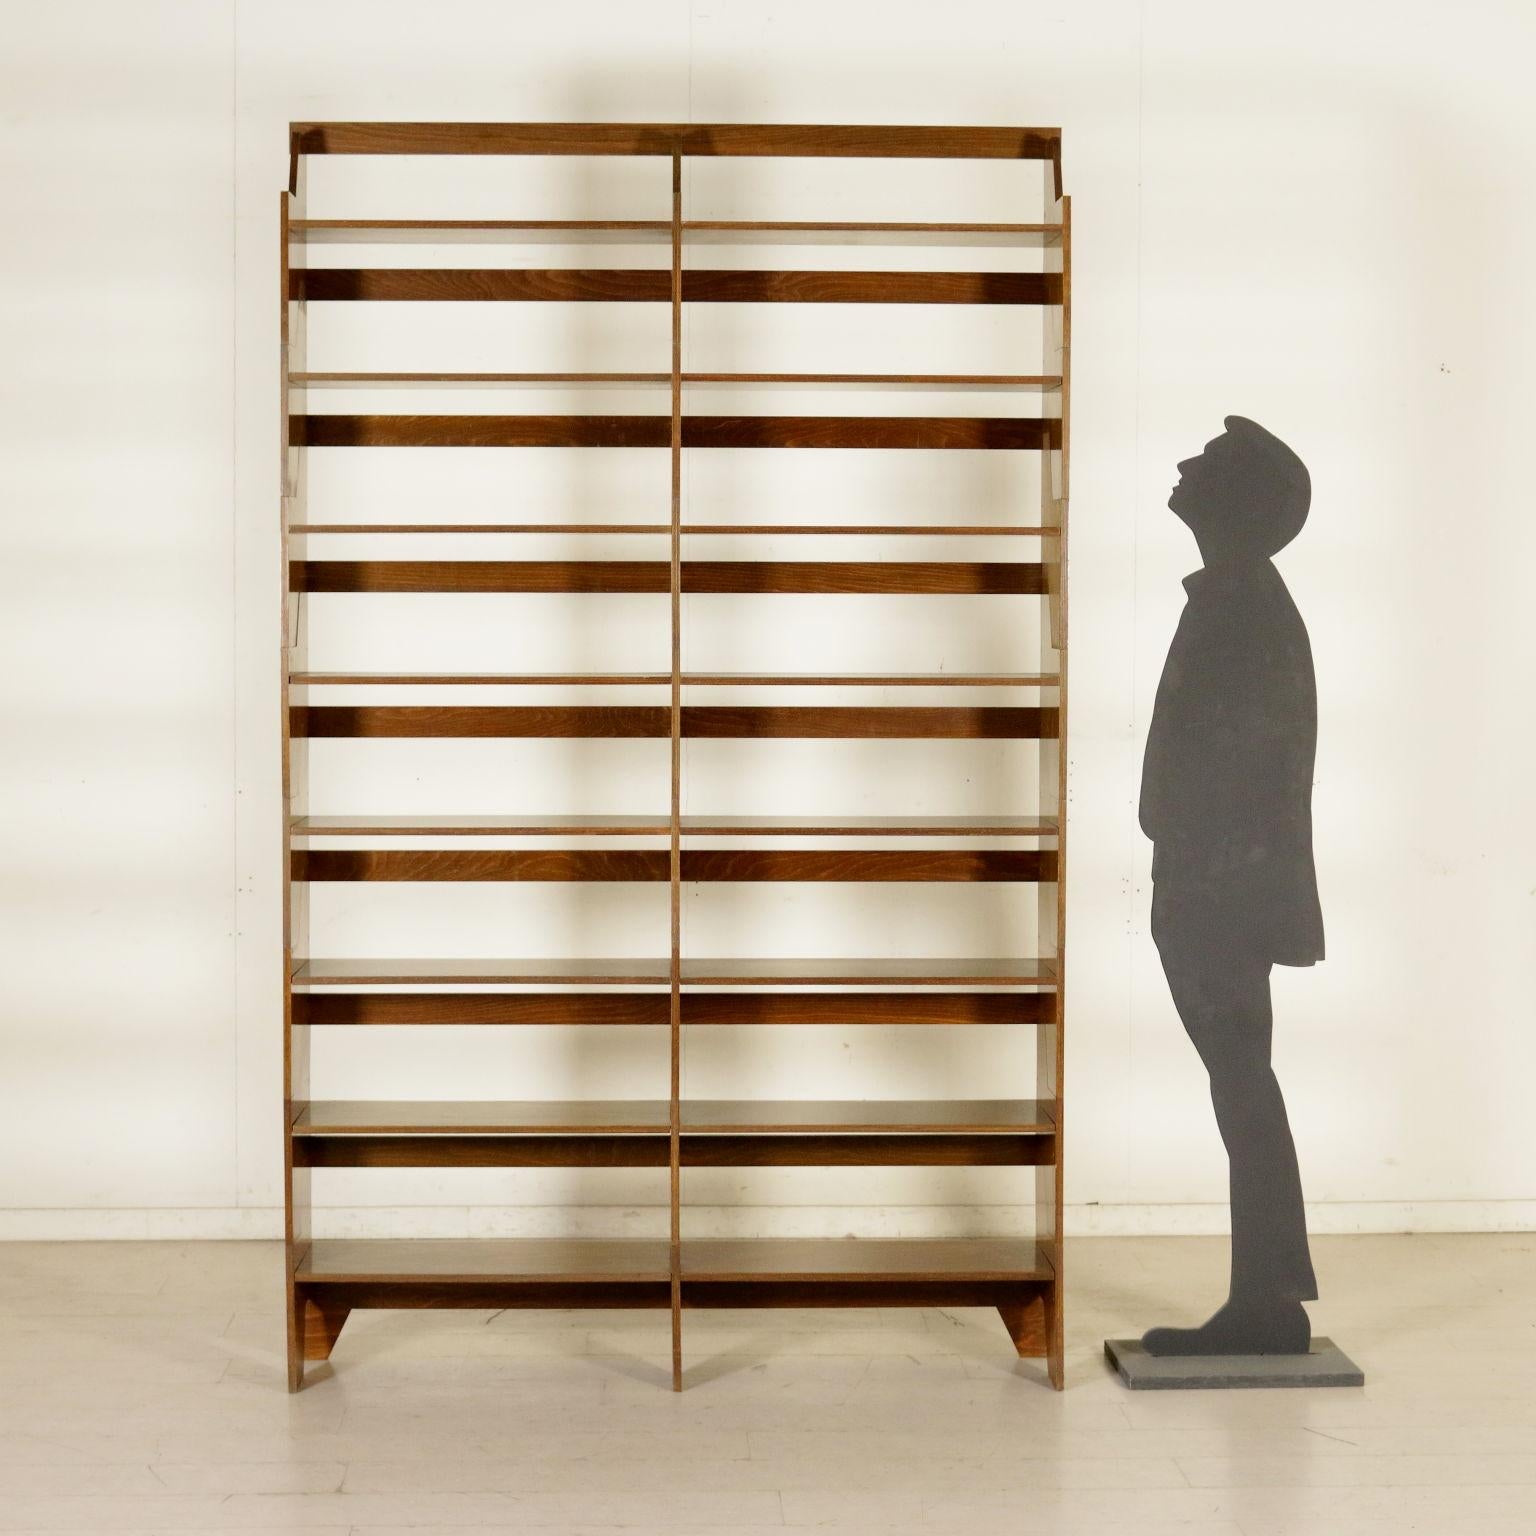 A bookcase designed by Renato Forti (1923-2015), modular elements. Stained multi-layered wood. Model: F 54. Manufactured in Italy, 1960s-1970s.